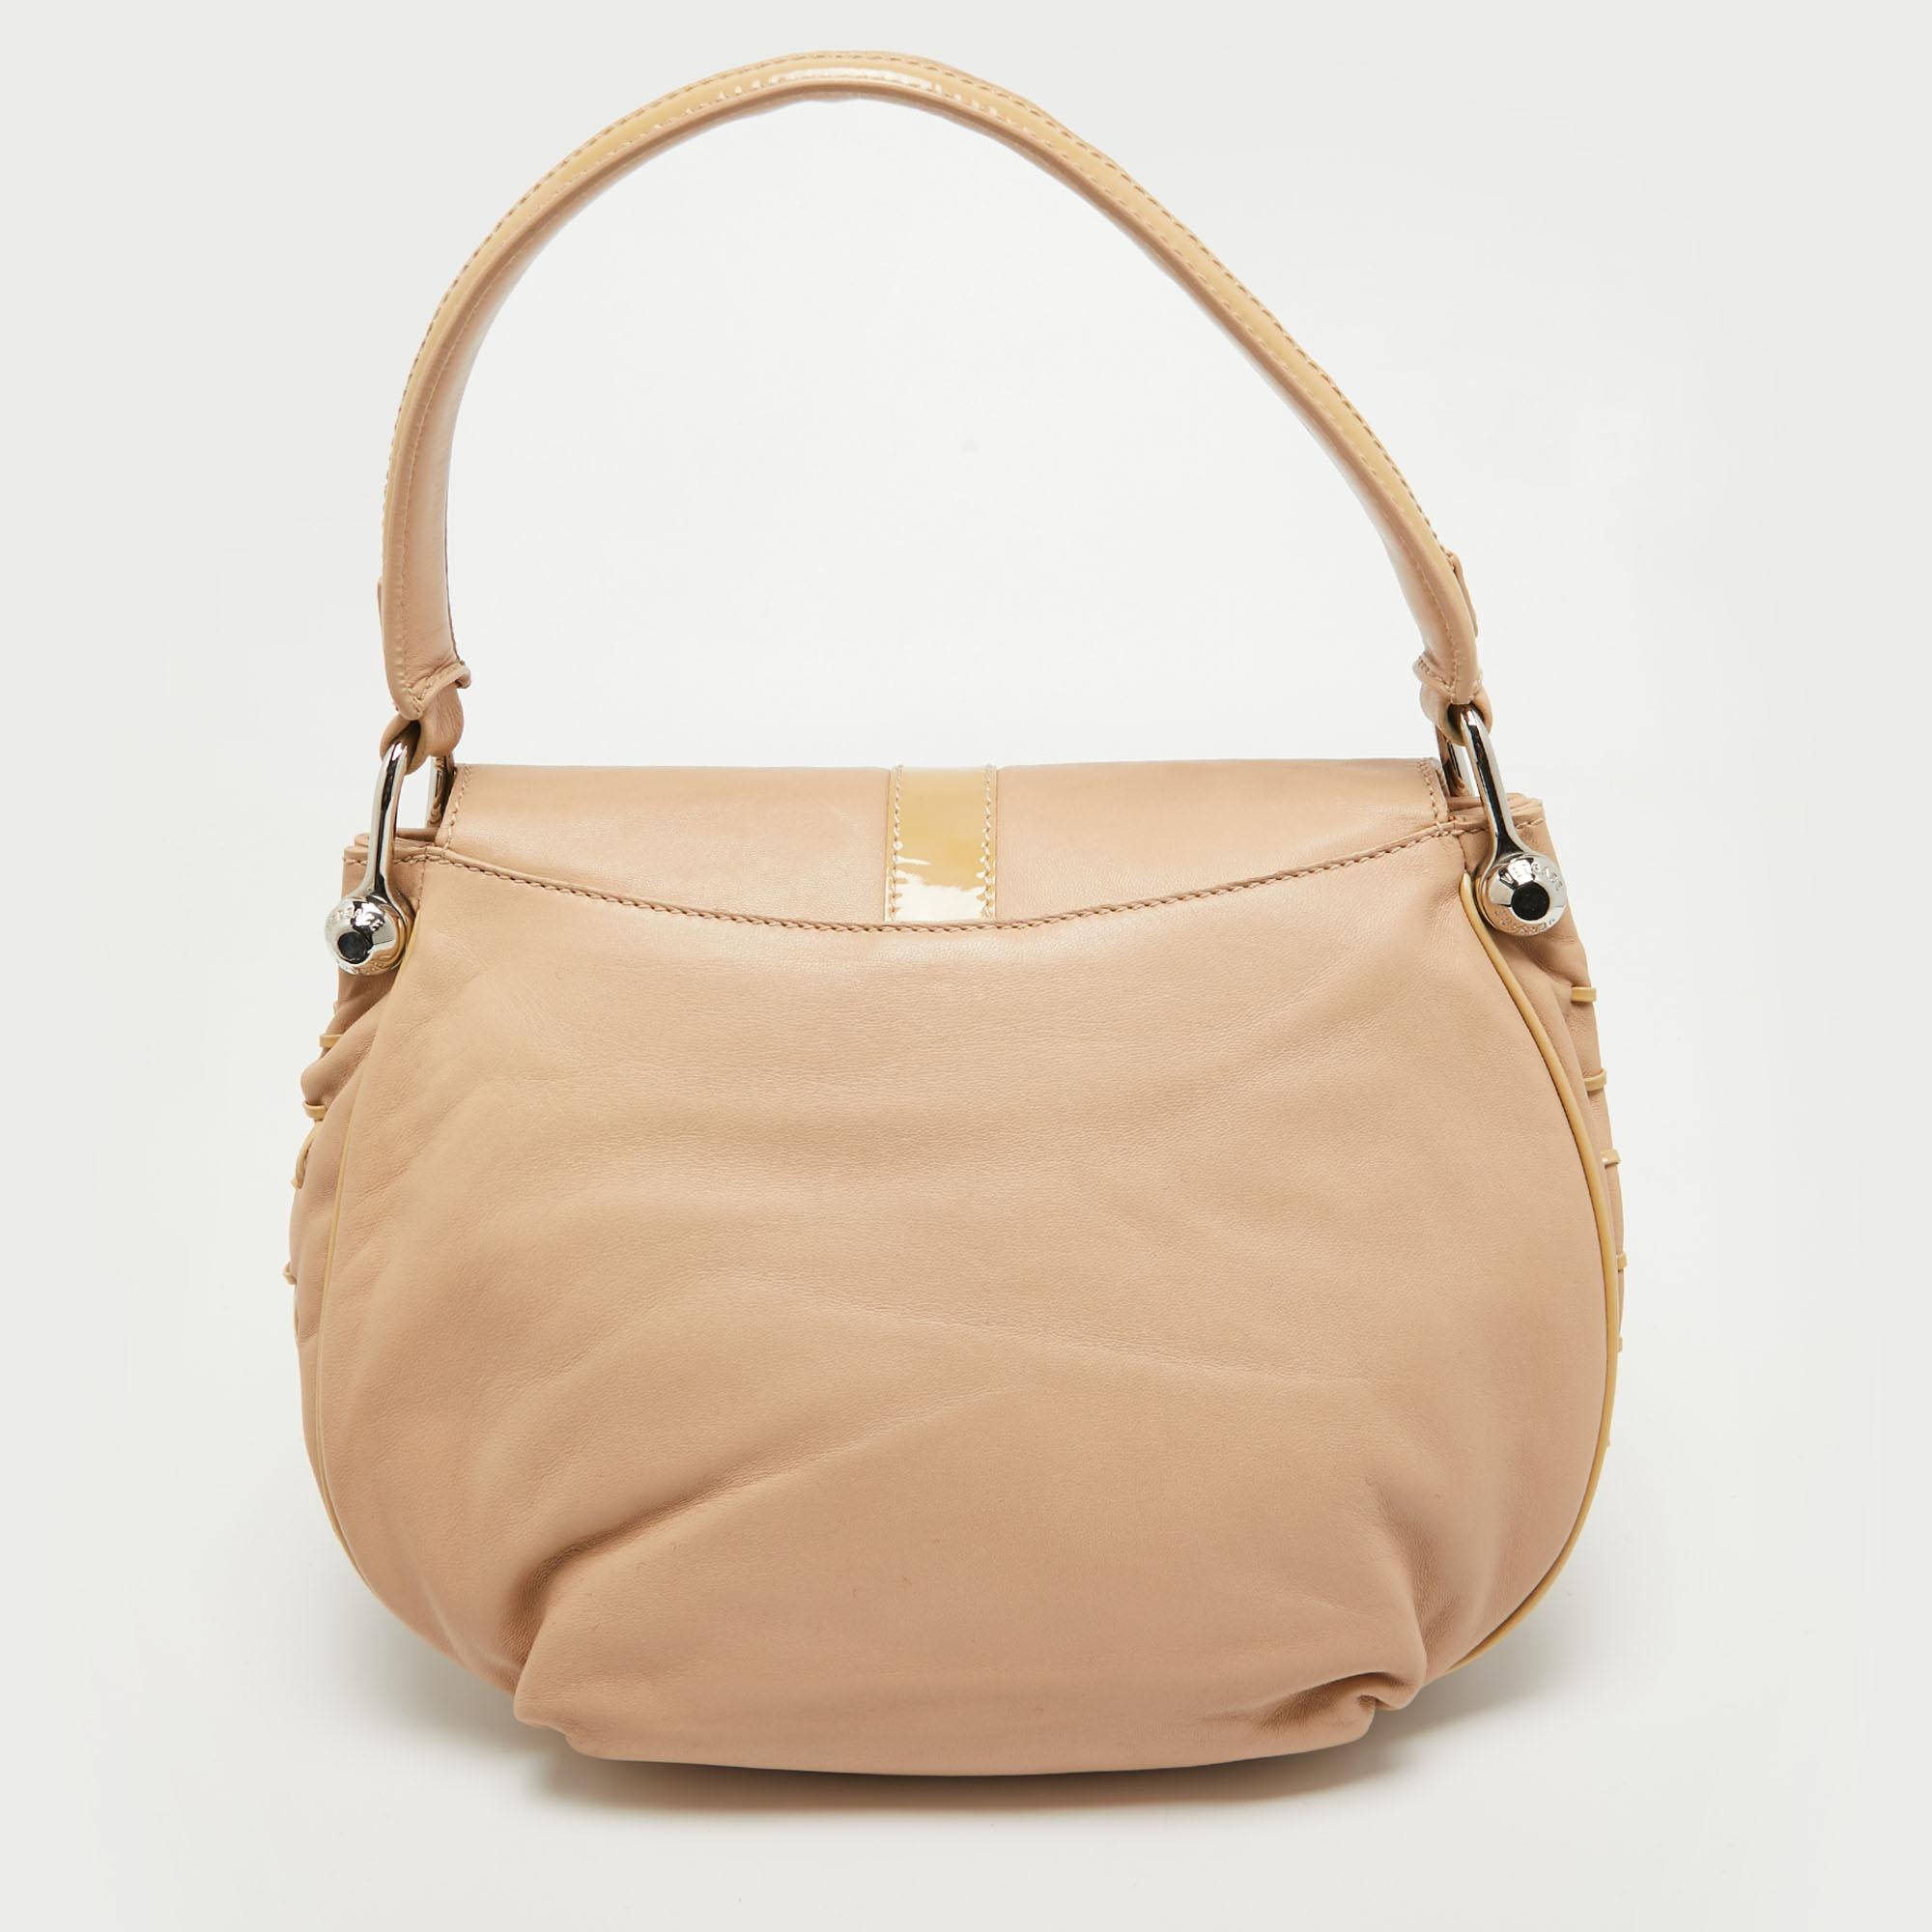 Stylish handbags never fail to make a fashionable impression. Make this designer hobo yours by pairing it with your sophisticated workwear as well as playful casual looks.

Includes: Info Booklet, Brand Tag